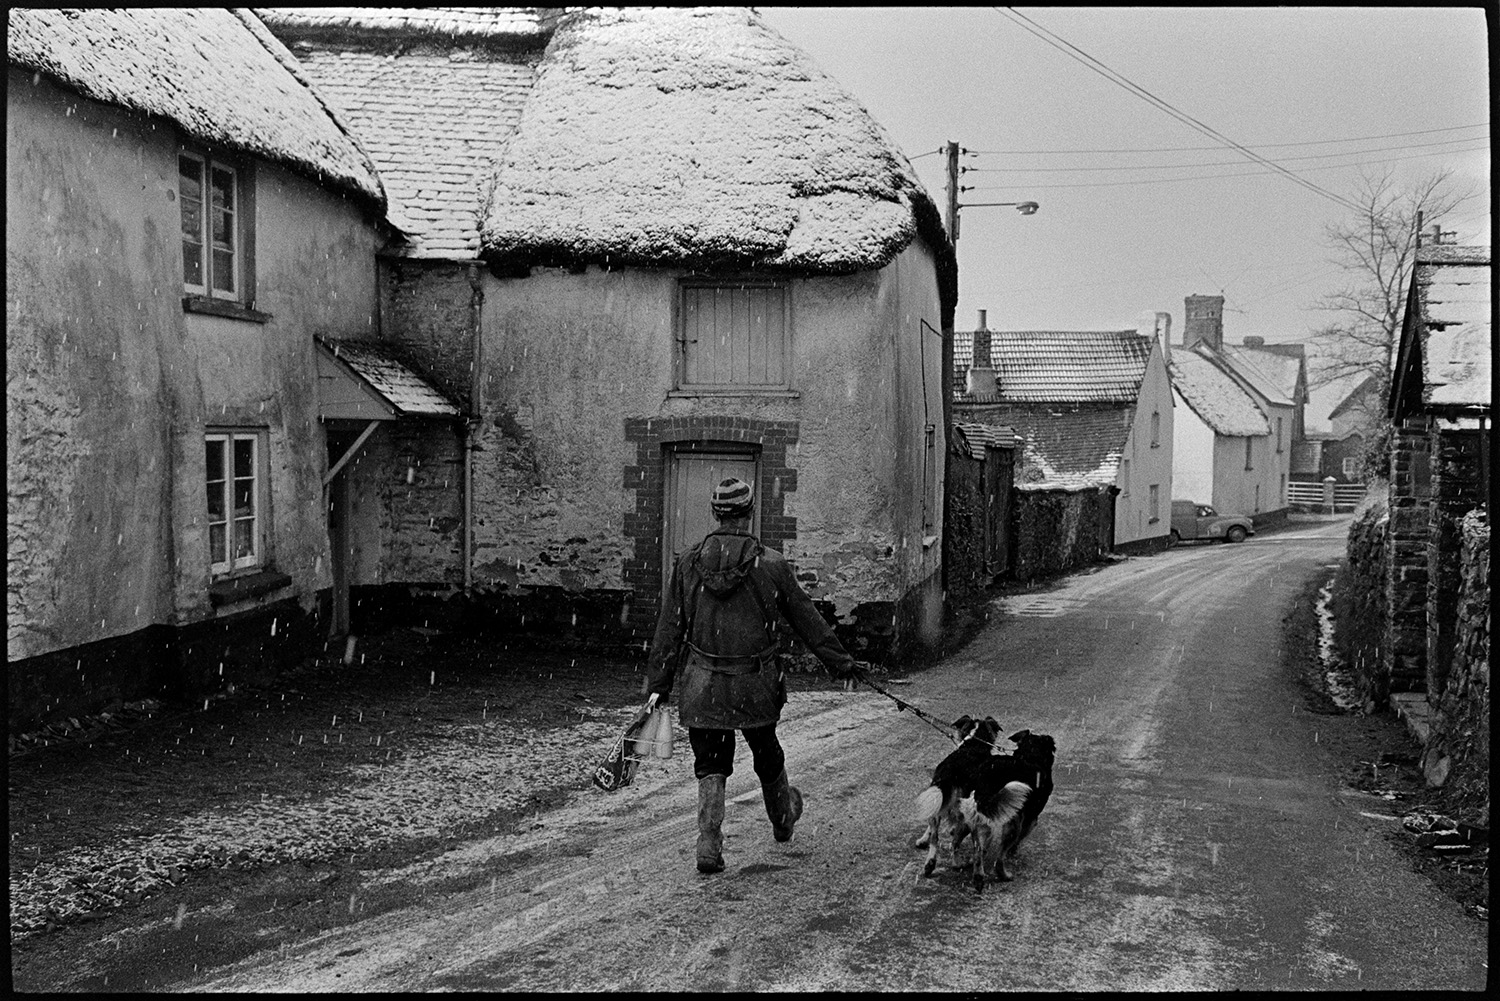 Cob and thatch farm in village in snow.
[A person carrying a bag and bottles of milk, with two dogs on a lead, walking along an icy road  past the cob and thatch farmhouse at Elliots, Roborough. The thatched roof is covered with snow and more snow can be seen falling. ]